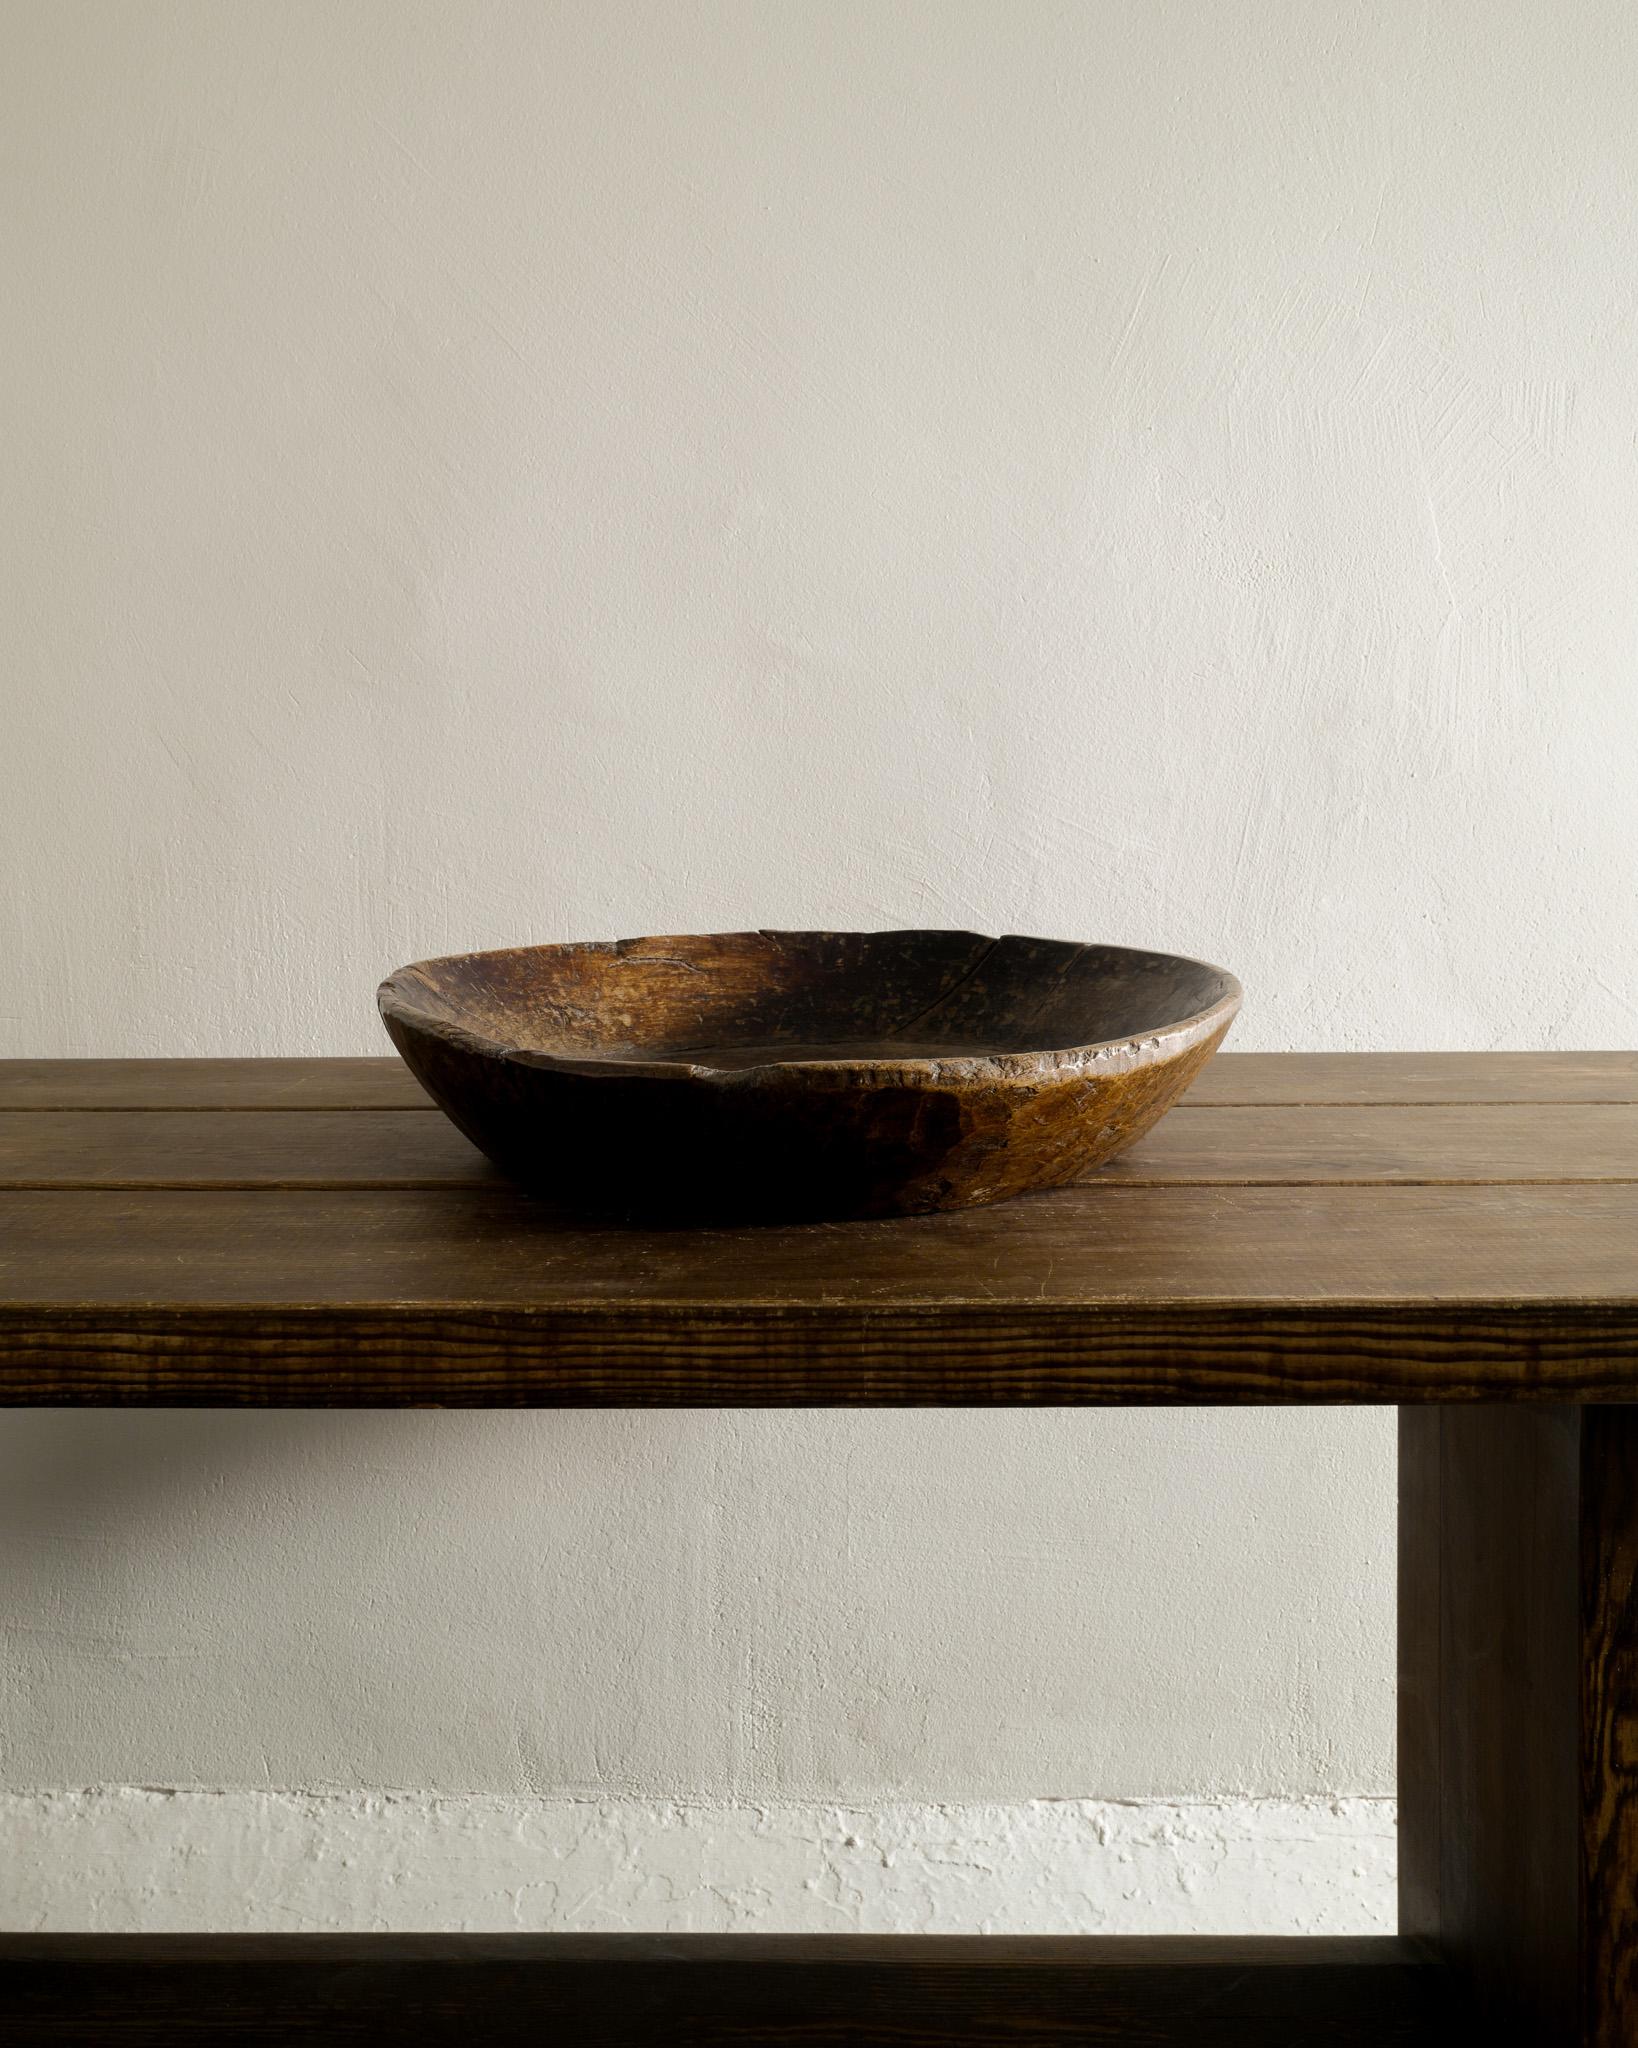 Rare and very nice hand carved dark brown wooden bowl / tray in solid oak produced in France early 1800s. In good condition. 

Dimensions: H 9,5 cm / 3.75